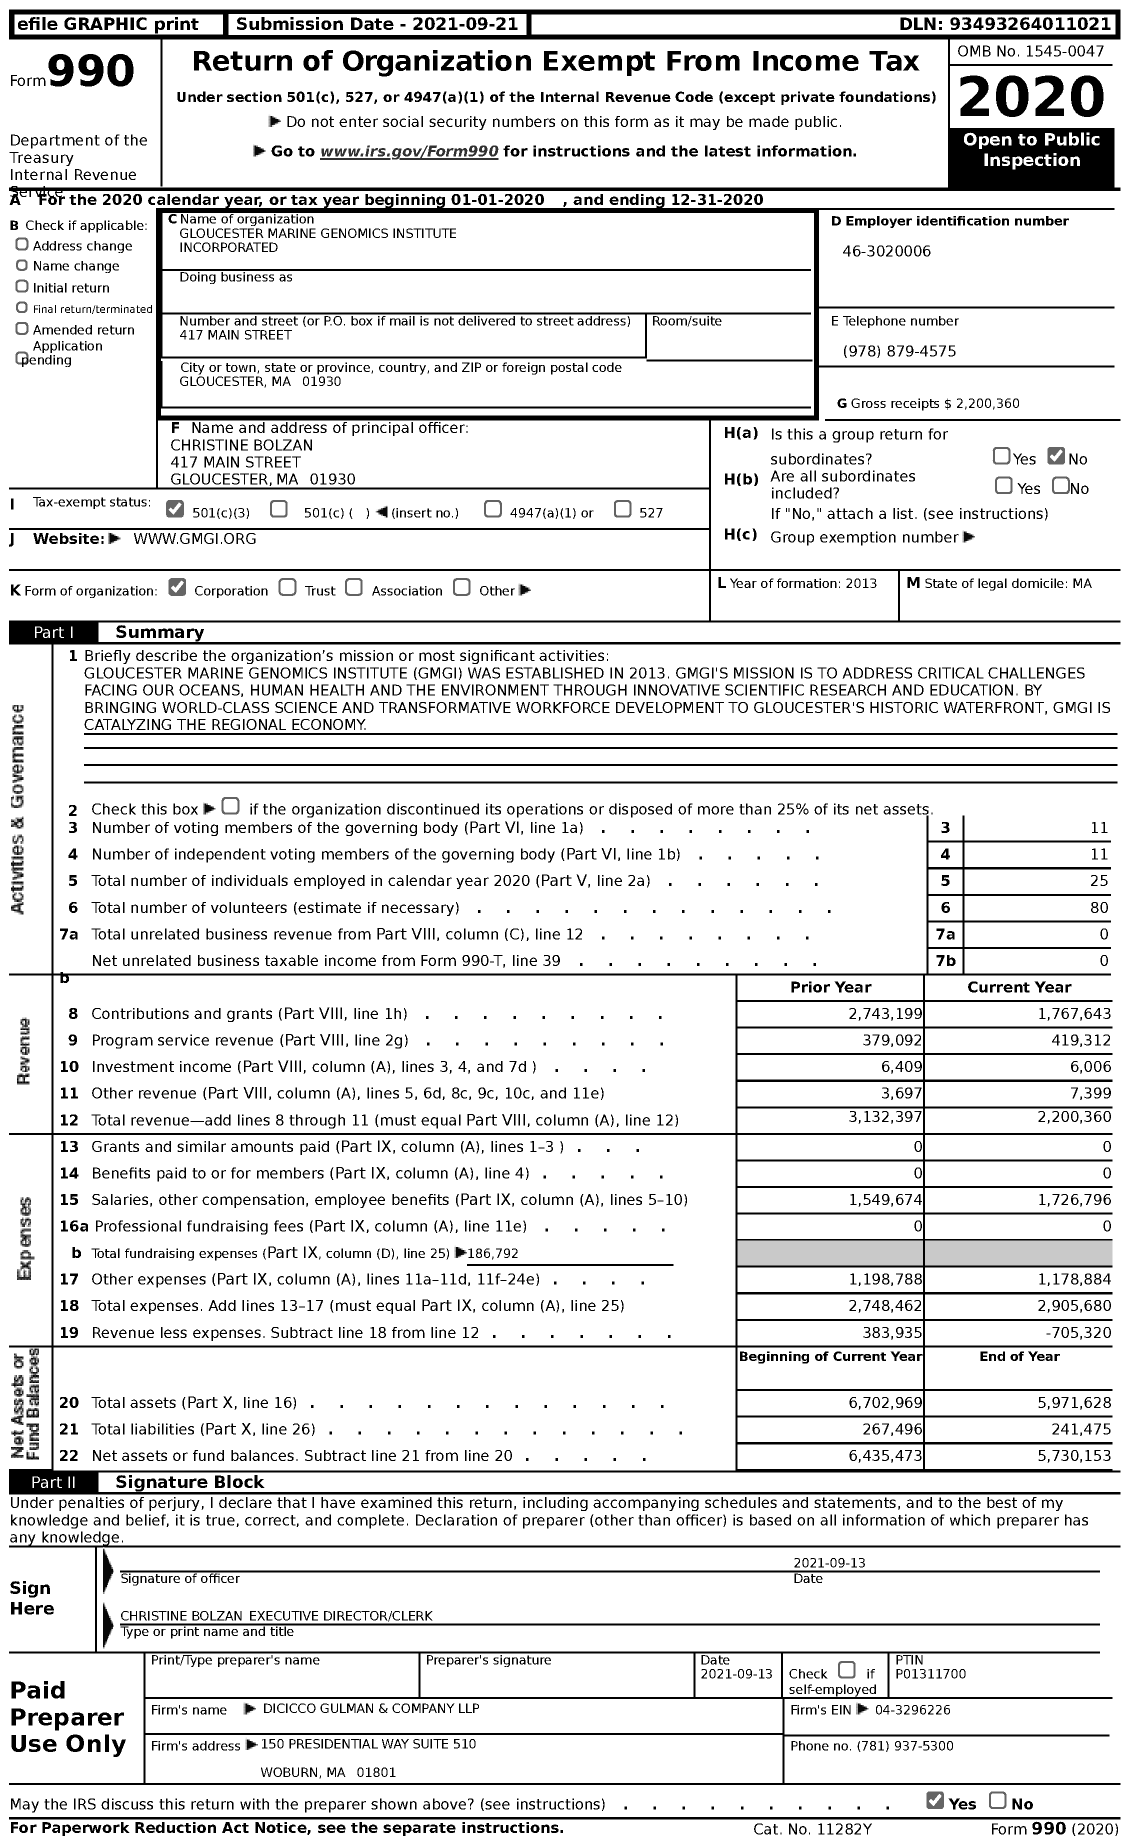 Image of first page of 2020 Form 990 for Gloucester Marine Genomics Institute Incorporated